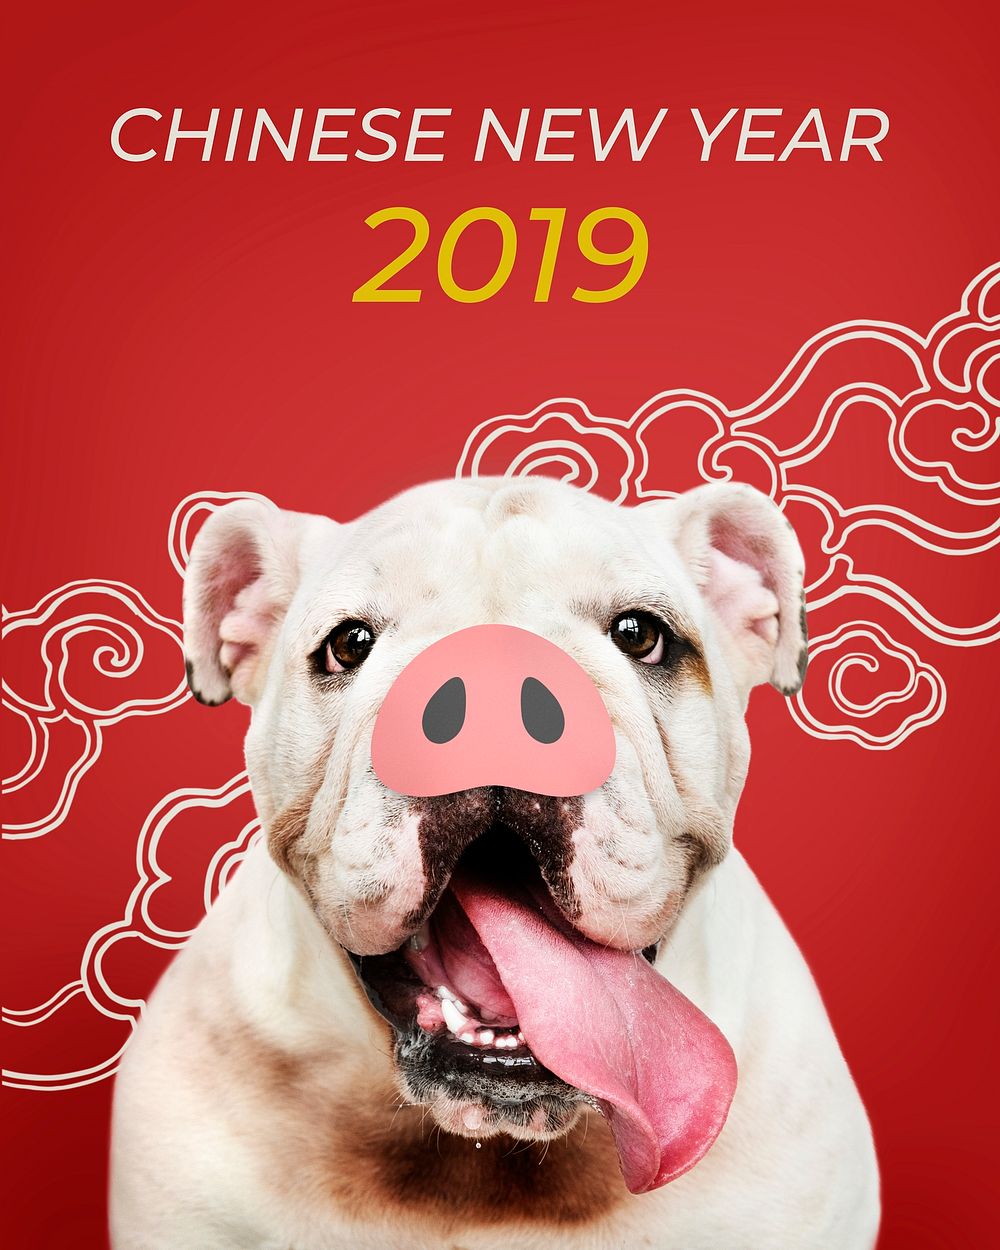 Adorable Bulldog puppy with a snout in front of a Chinese New Year background